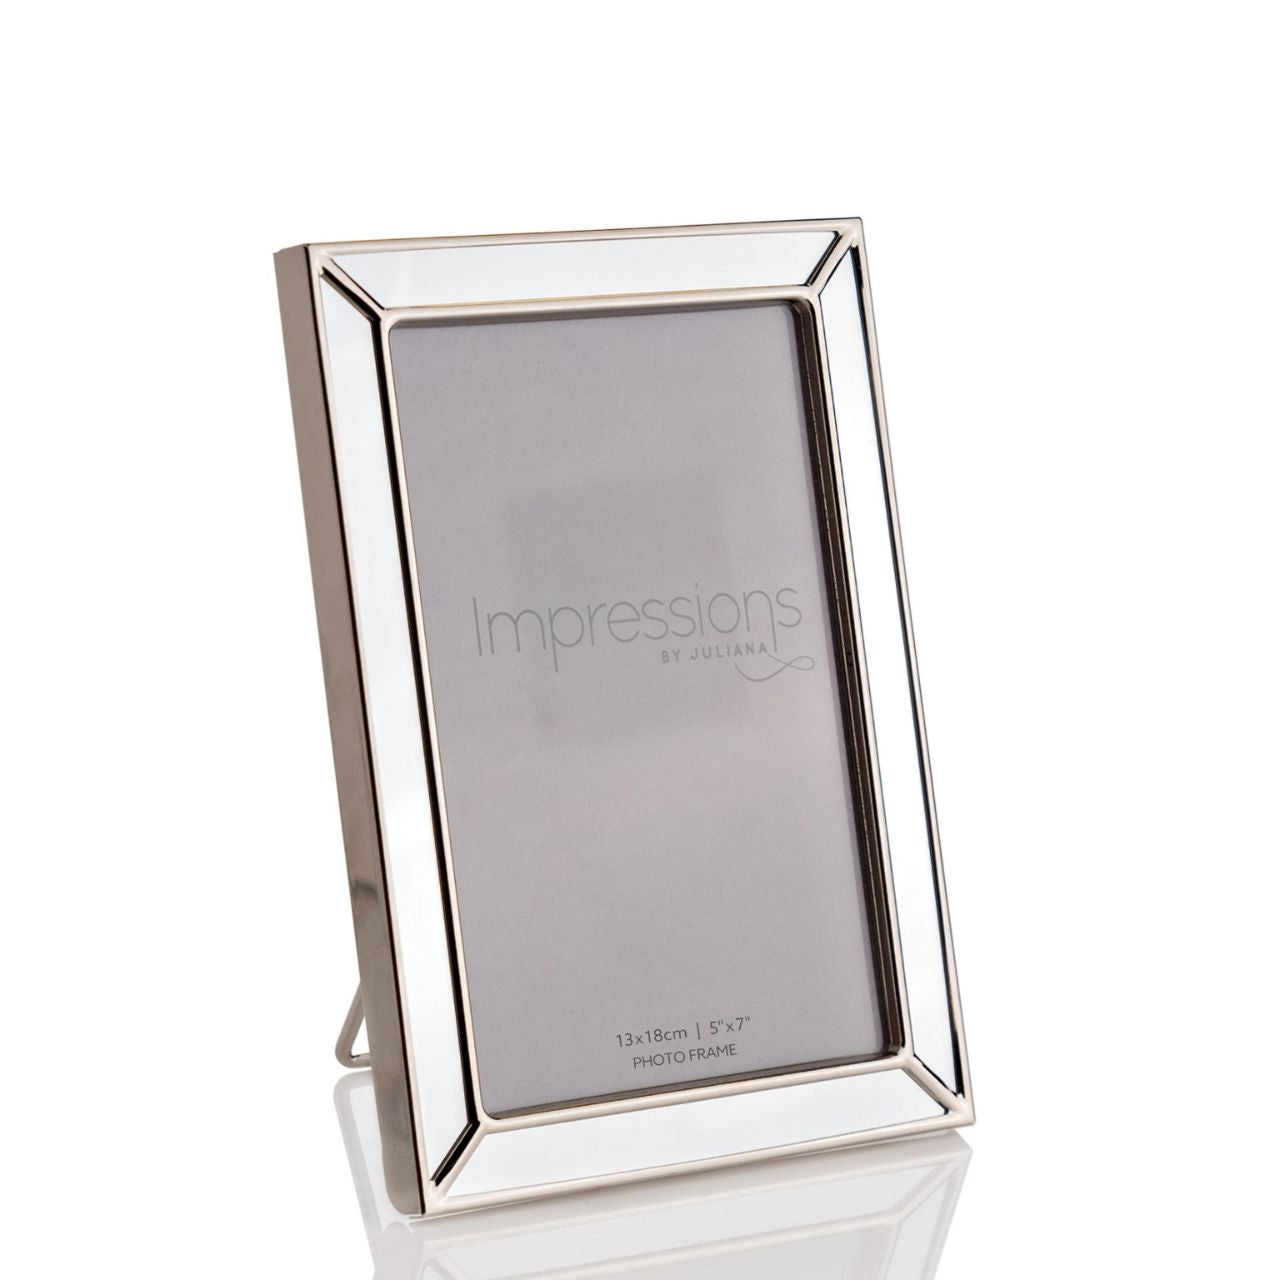 Silver & Mirrored Photo Frame 5" x 7"  With an uncomplicated design, this photo frame brings a classic timeless touch, suitable for any interior theme.